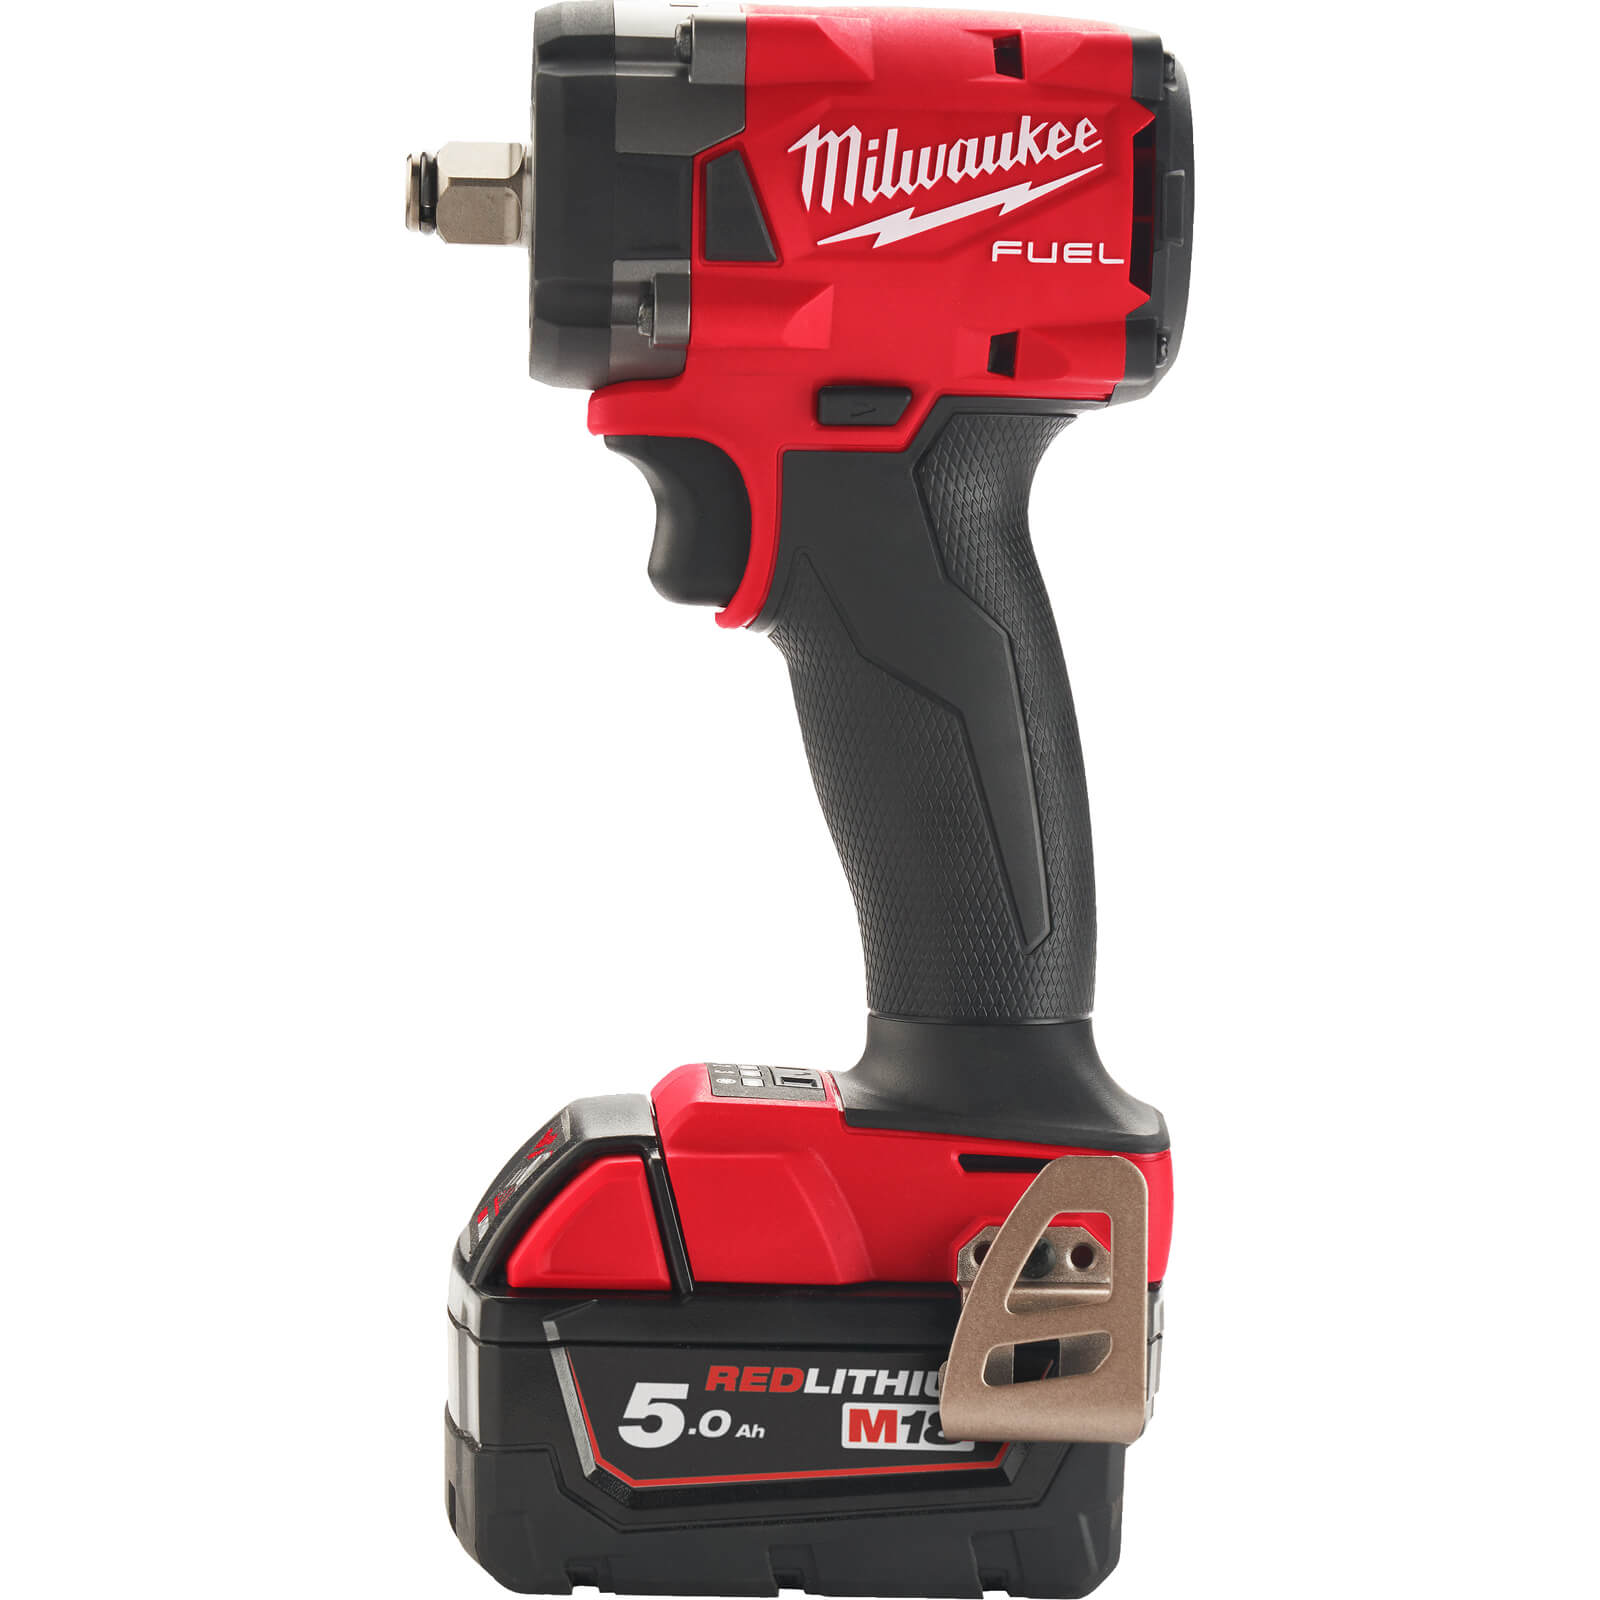 Image of Milwaukee M18 FIW2F38 Fuel 18v Cordless Brushless 3/8" Drive Impact Wrench 2 x 5ah Li-ion Charger Case